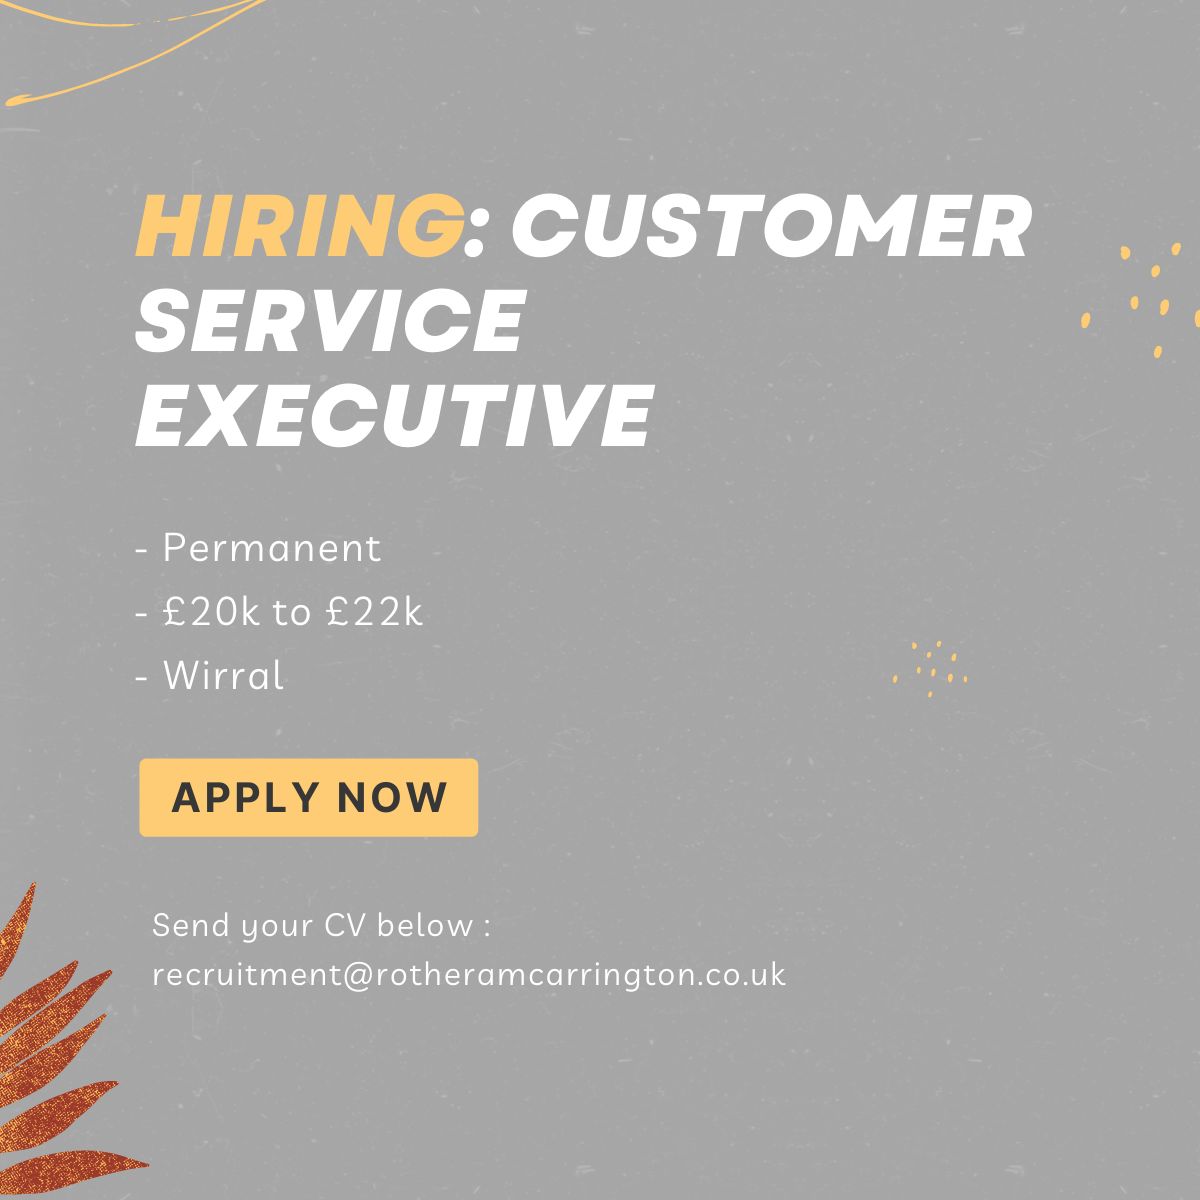 Hiring in #officesupport! 🧑‍💻

New permanent role as a #CustomerServiceExecutive in the #Wirral. 20k - 22k per annum, flexible hours.

Apply here: lnkd.in/ea67CM8G or call us at 01244 980 591.

#officejobs #officesupport #applynow #greatplacetowork #greatopportunity #newjob